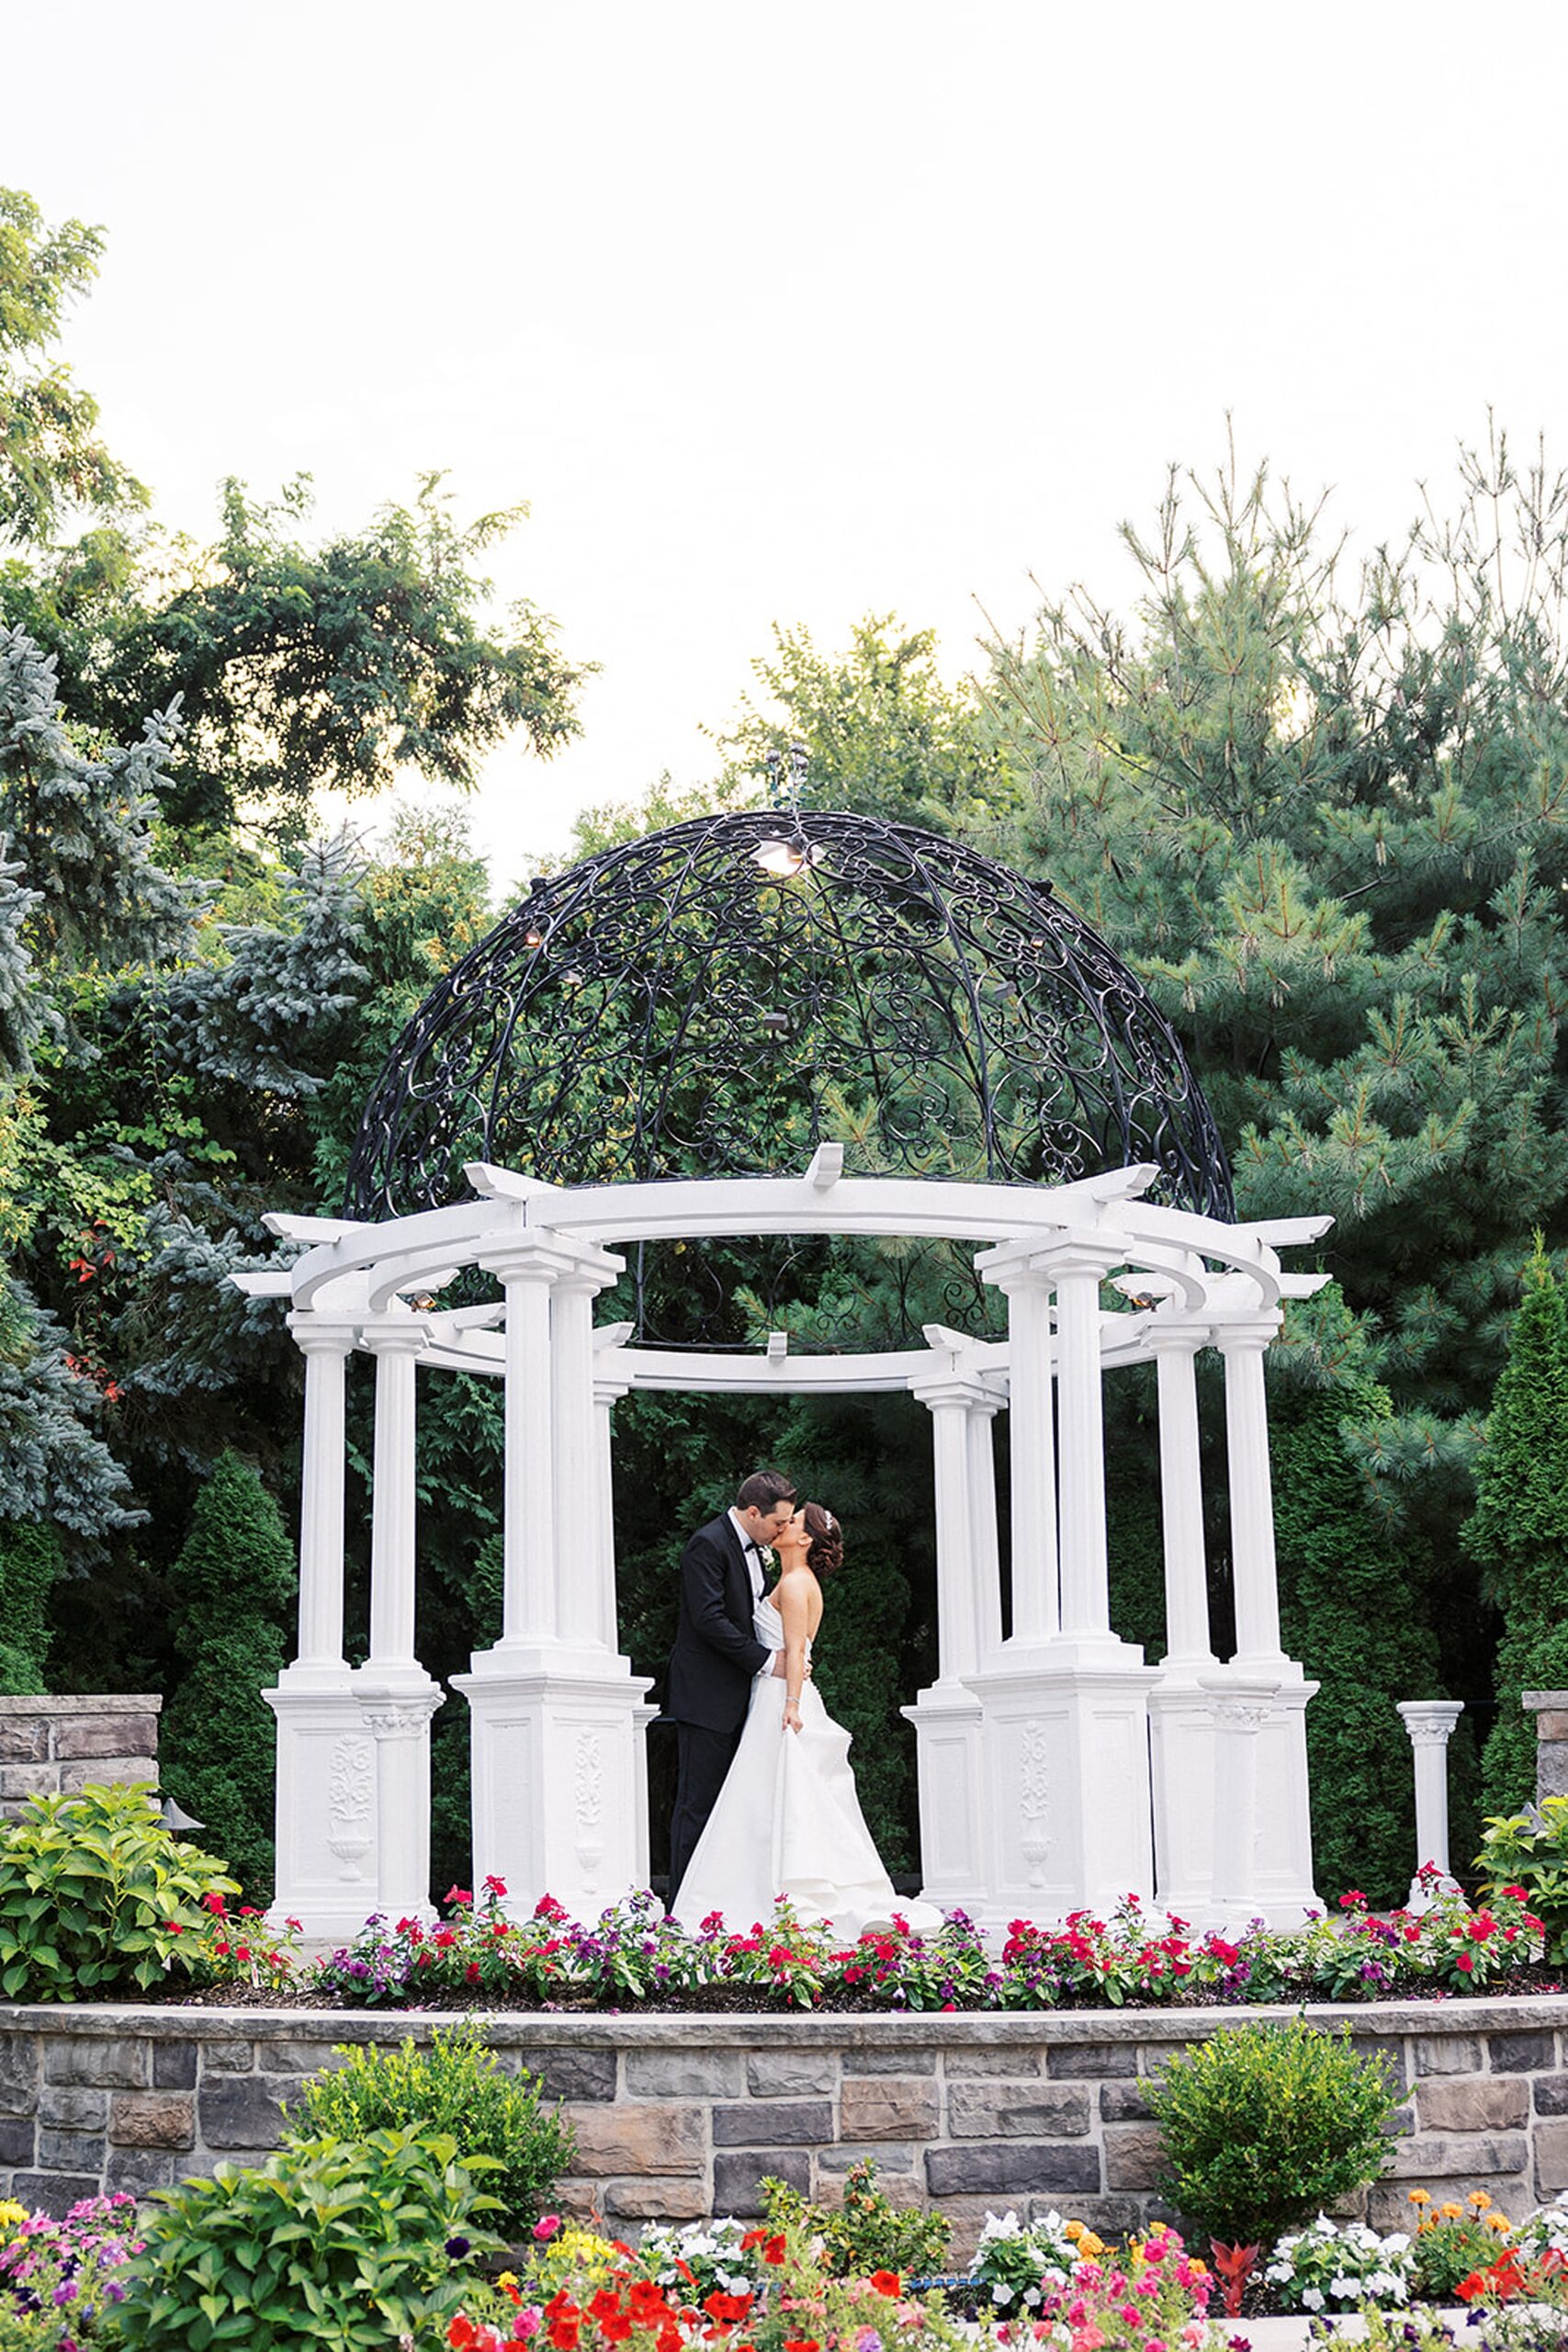 Newlyweds kiss under a large white gazebo in a garden at a valley regency wedding